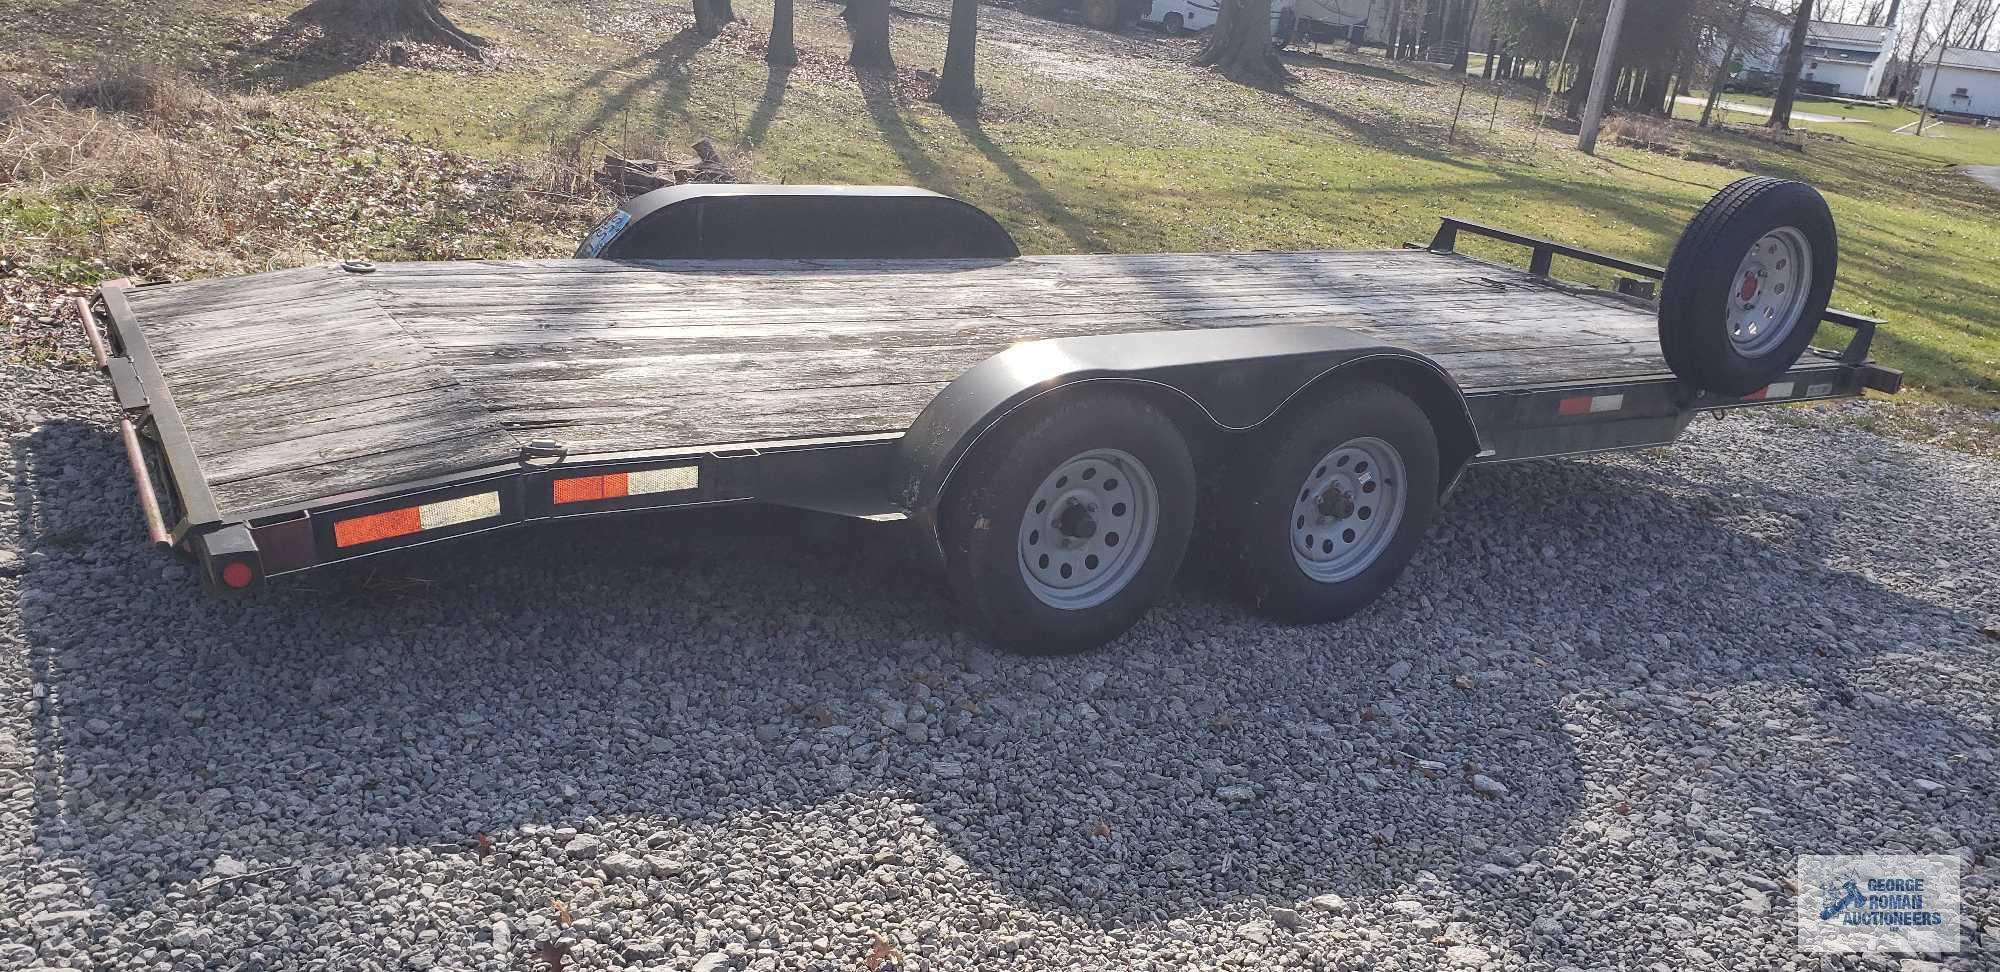 Quality Trailers 2011 car hauler utility trailer with ramps. VIN# 5NDFA1826BS000951. GVWR 7000#. 83